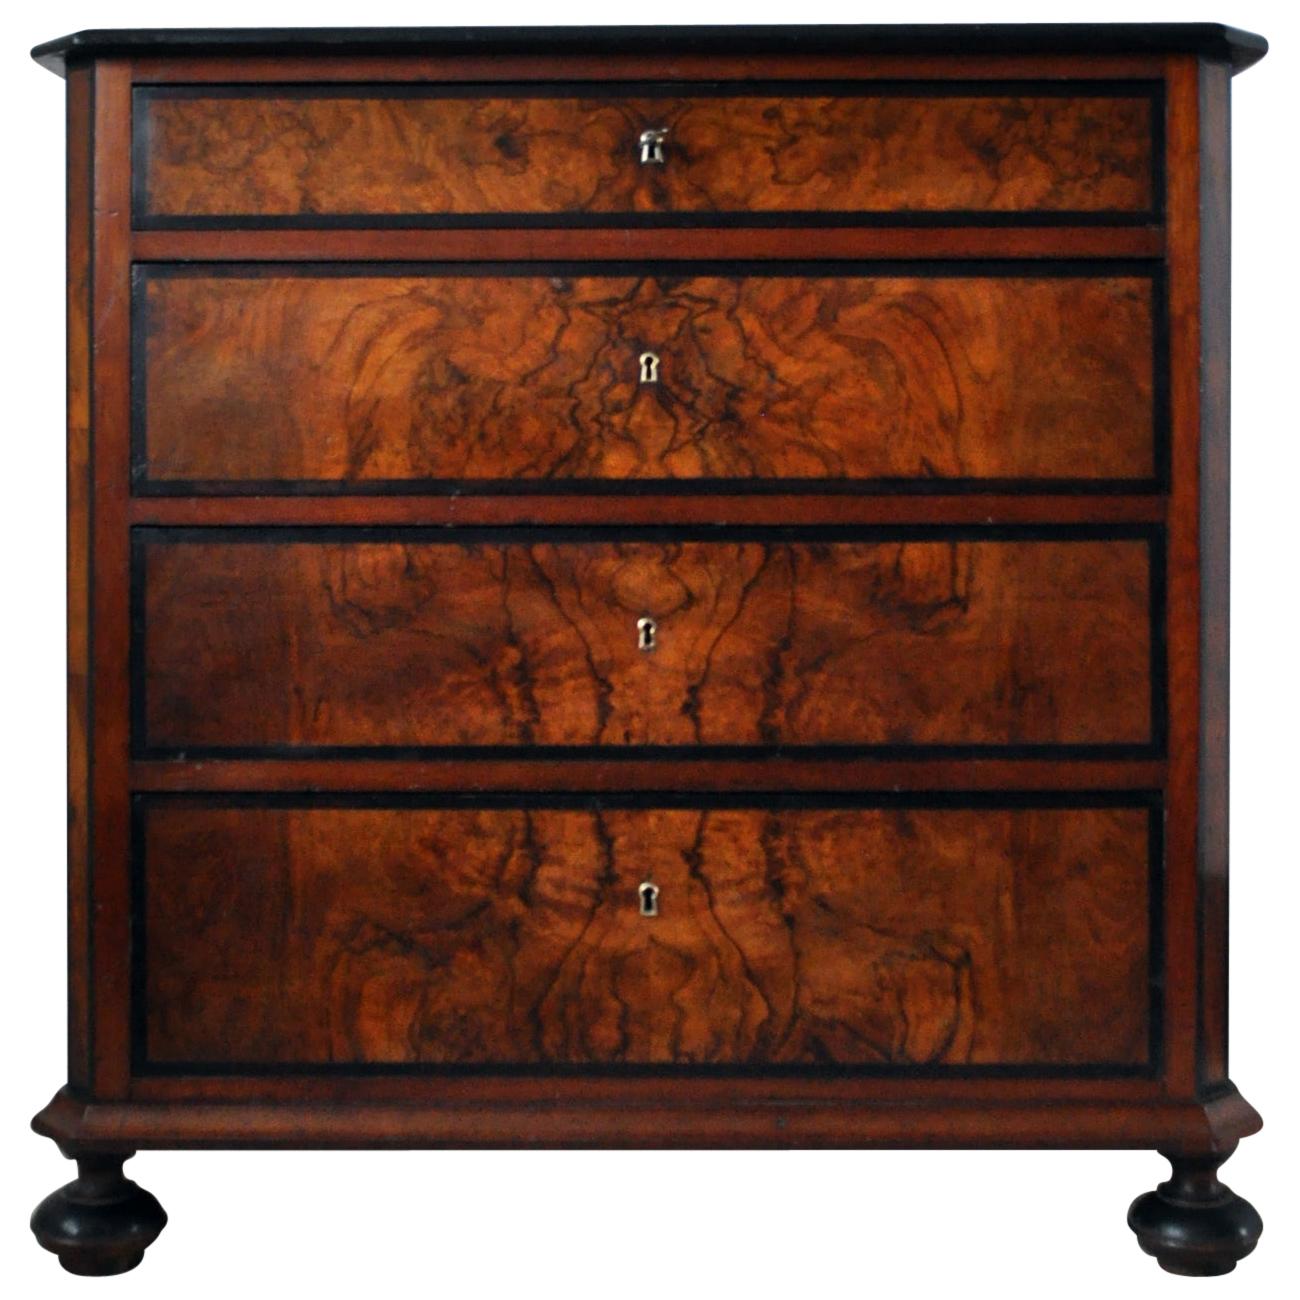 Antique Scandinavian Chest of Drawers in Walnut & Mahogany with Ebonized Details For Sale